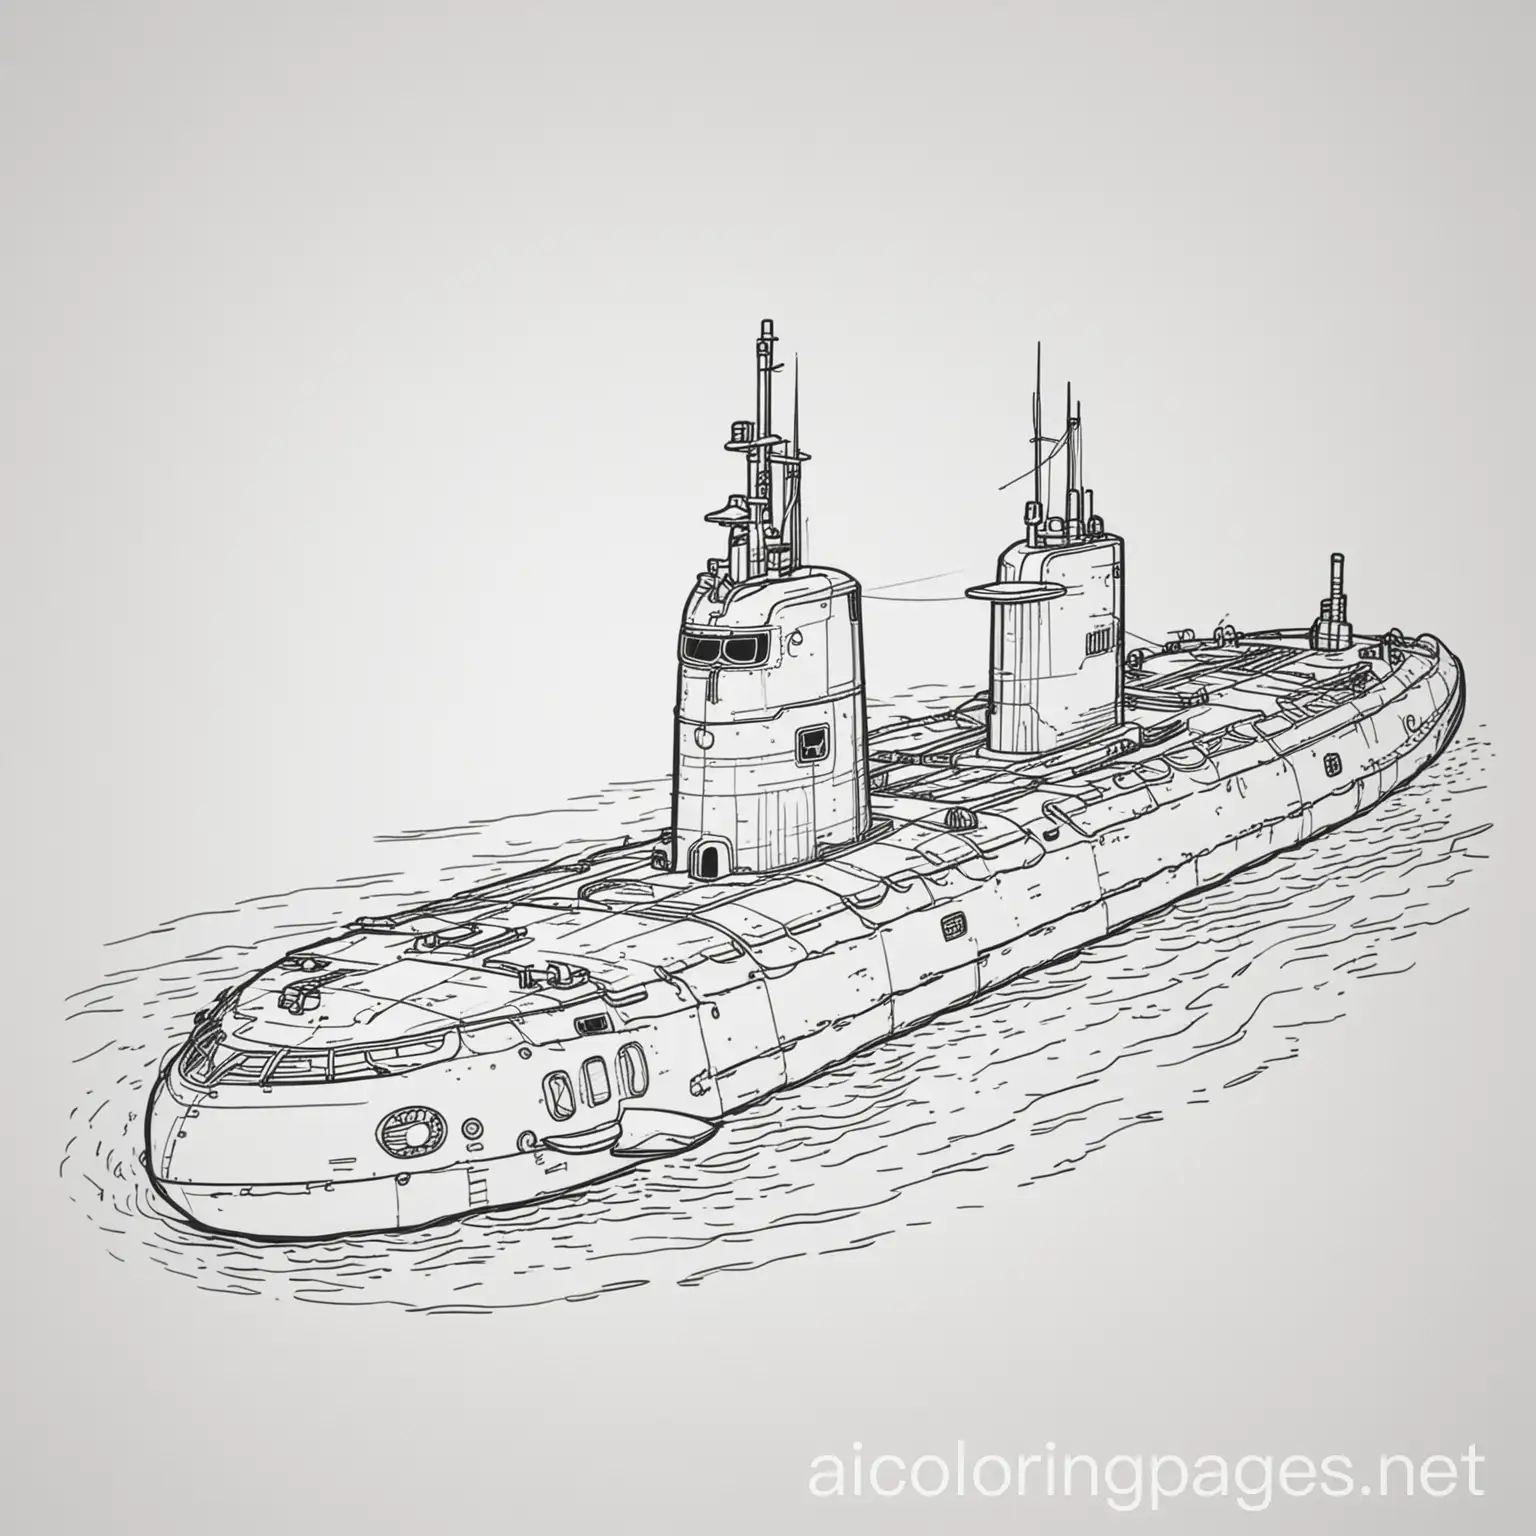 military submarine,n Coloring Page, black and white, line art, white background, Simplicity, Ample White Space.n The background of the coloring page is plain white to make it easy for young children to color within the lines.n The outlines of all the subjects are easy to distinguish, making it simple for kids to color without too much difficulty